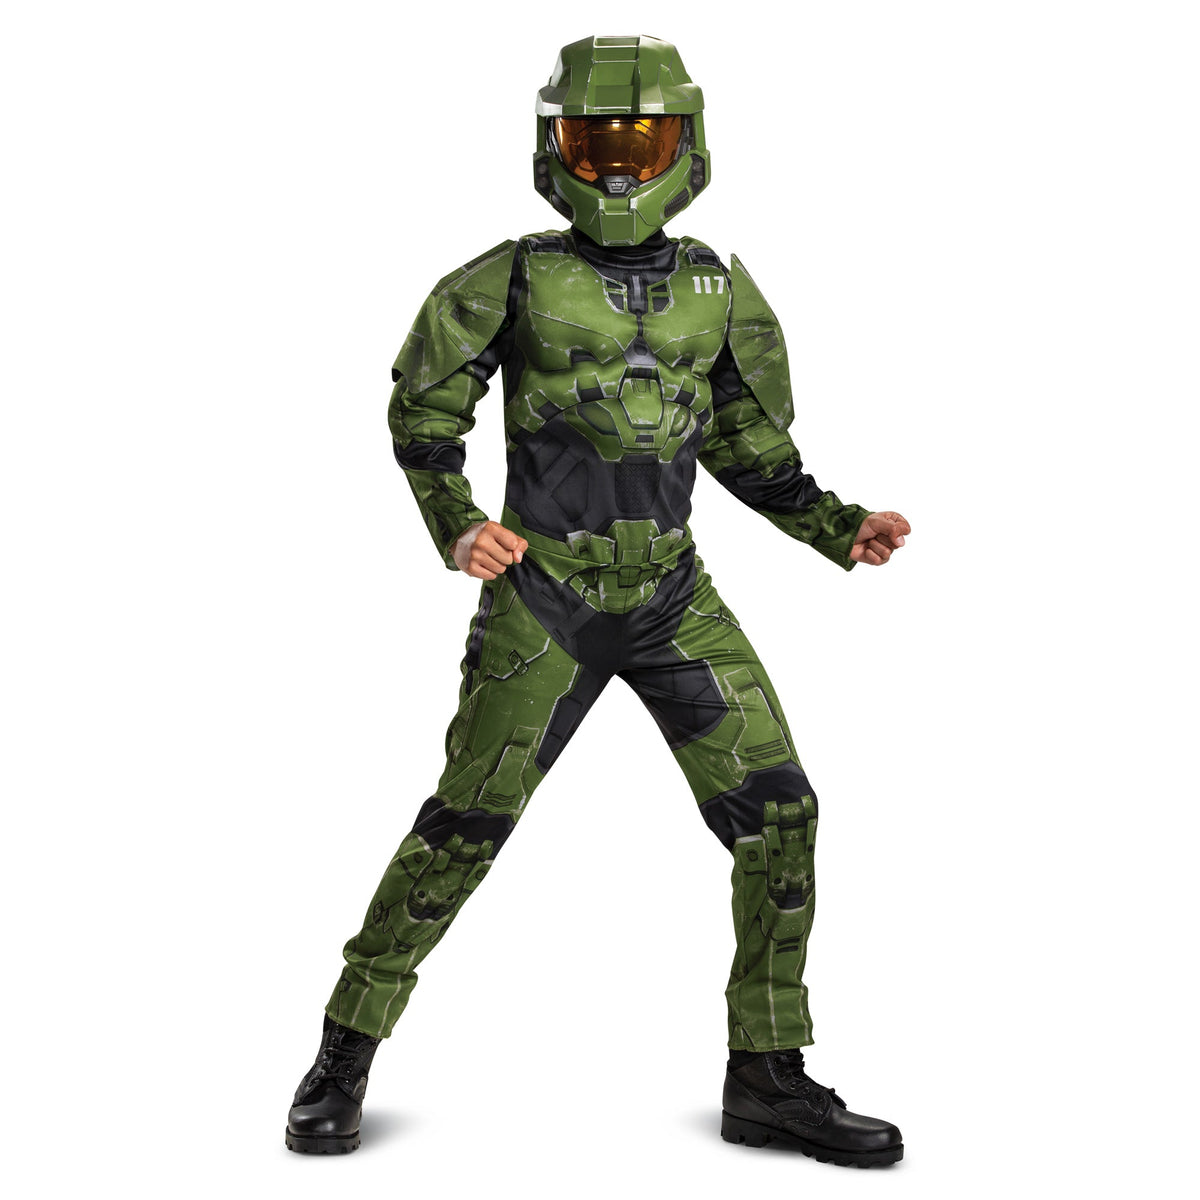 DISGUISE (TOY-SPORT) Costumes Halo Infinite Master Chief Muscle Costume for Kids, Green and Black Jumpsuit